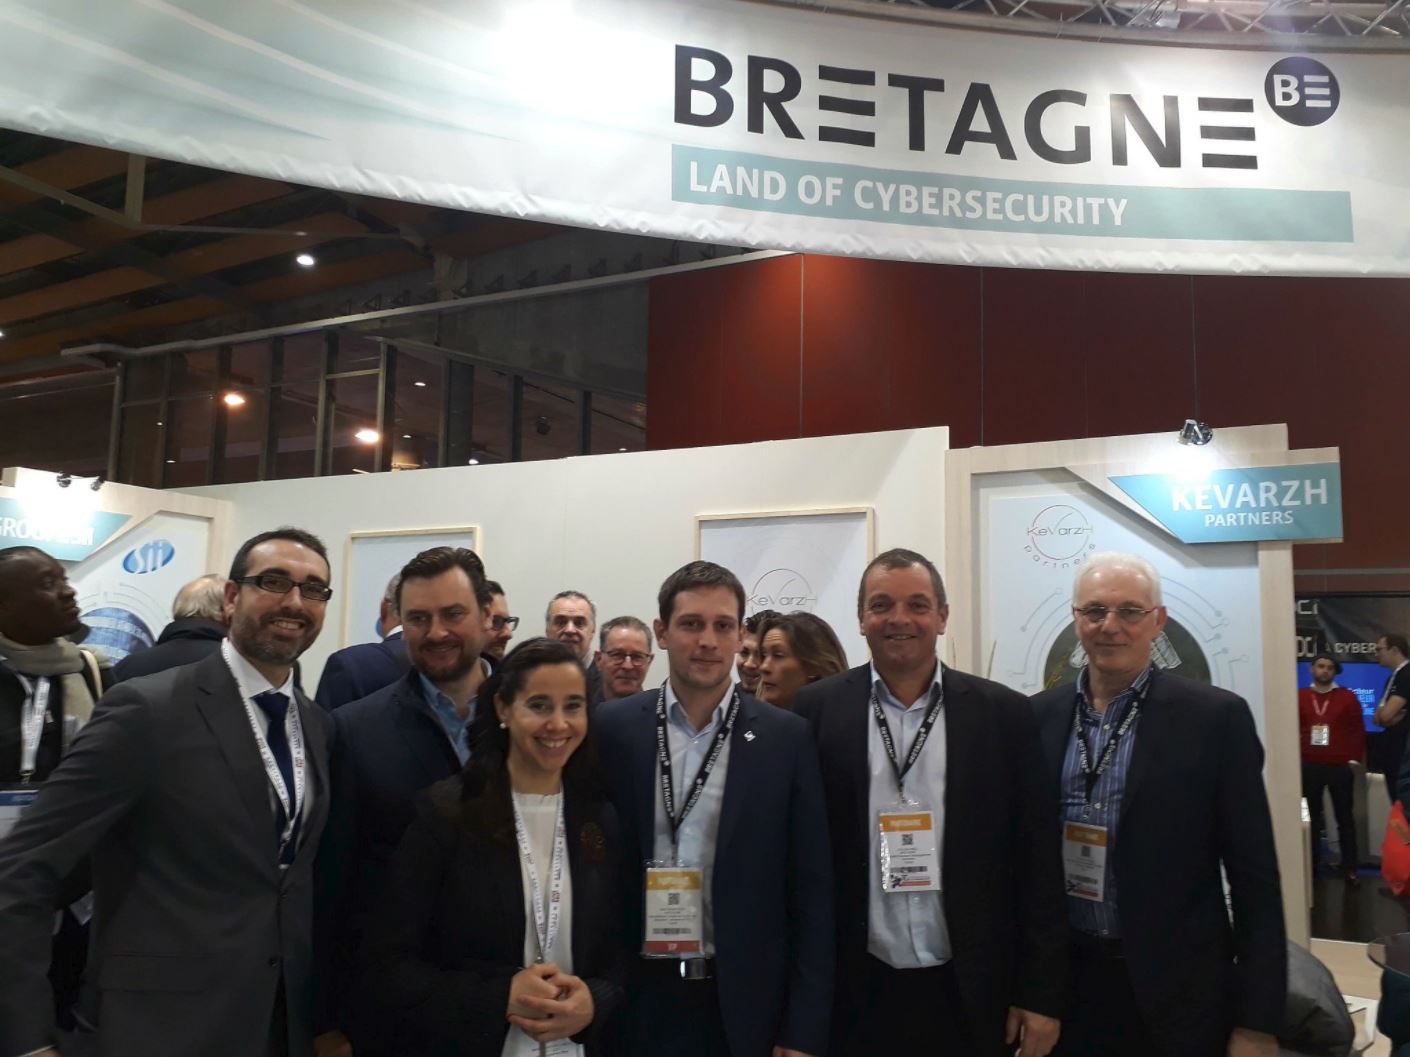 Visit of Spanish delegation at the Bretagne's stand